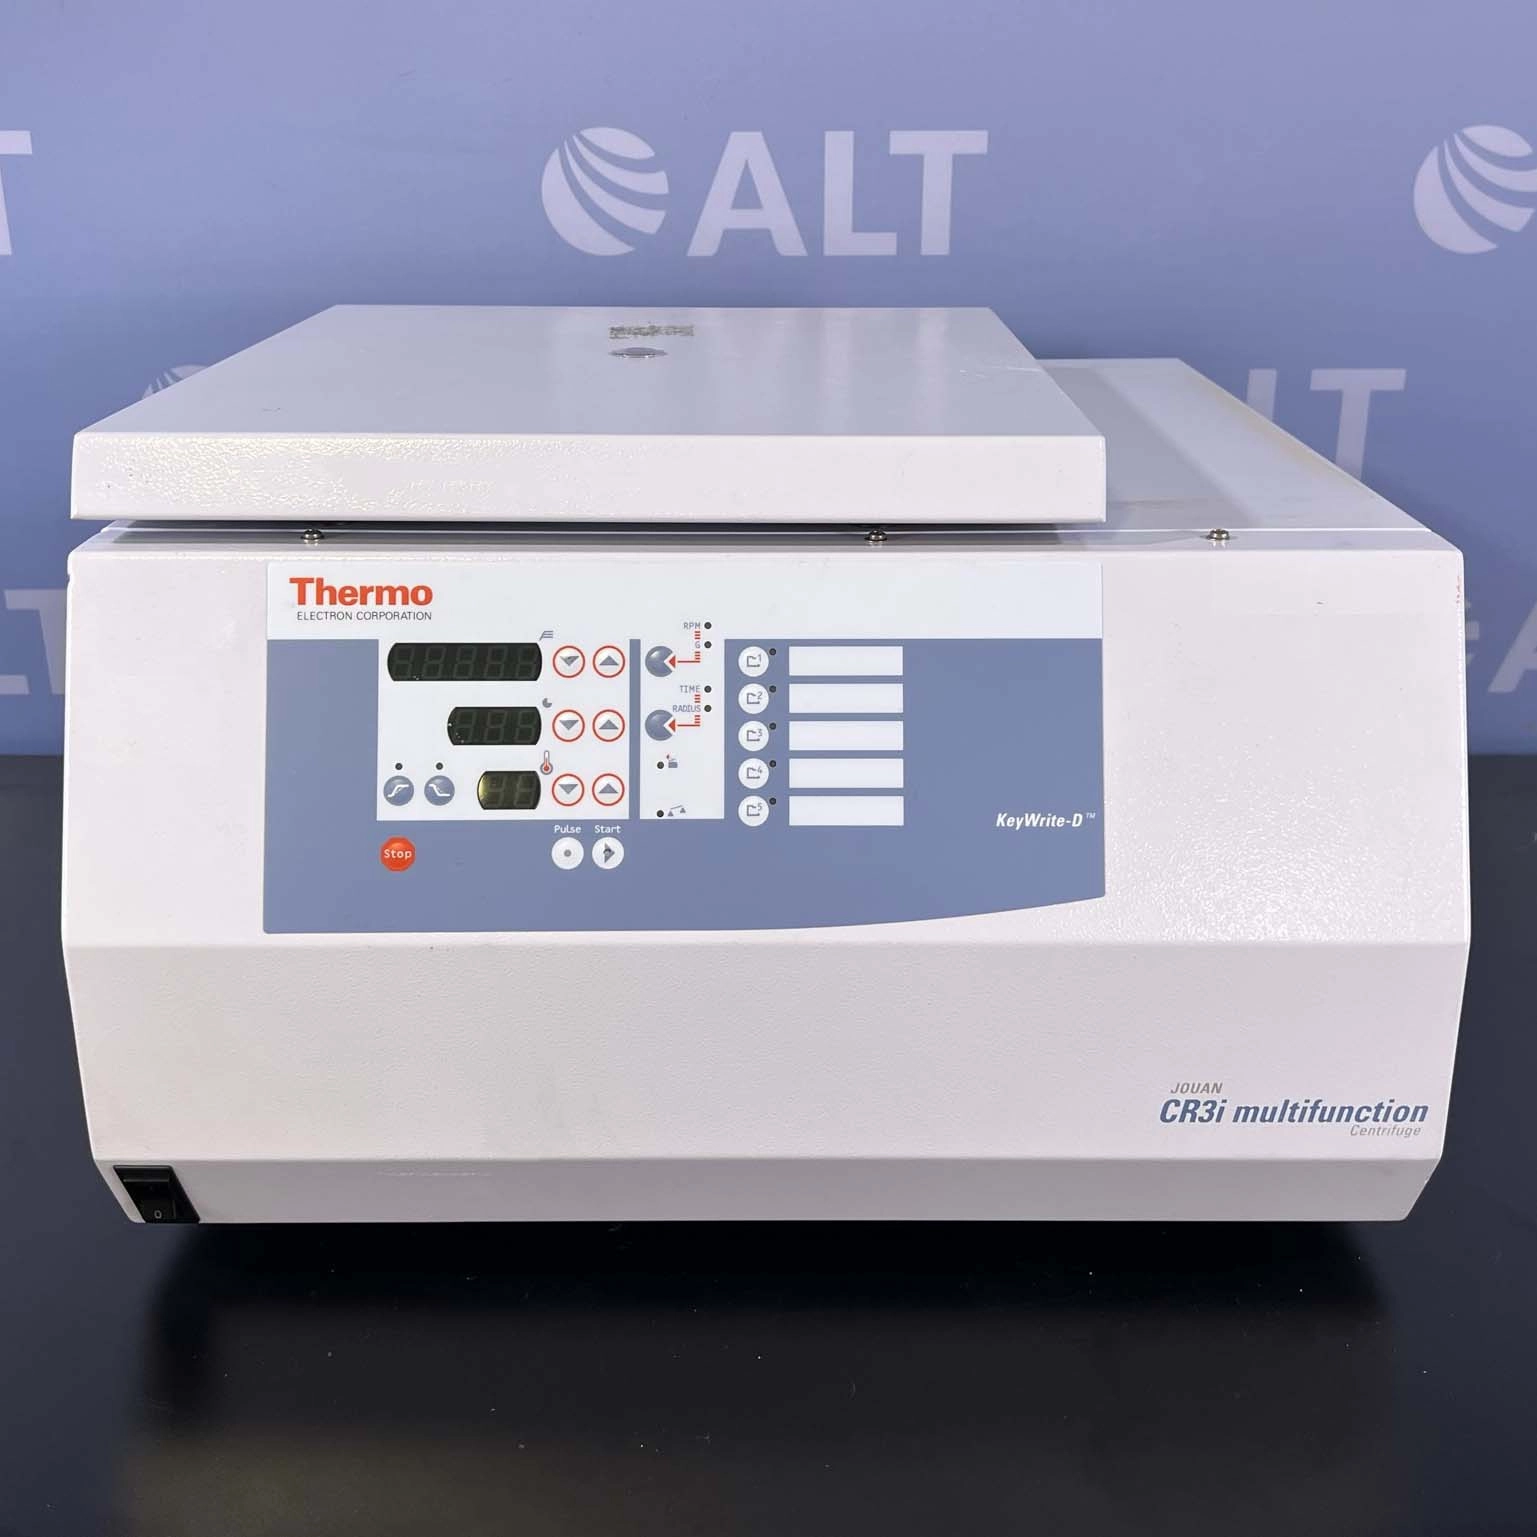 Thermo Scientific CR3i Multifunction Refrigerated Benchtop Centrifuge